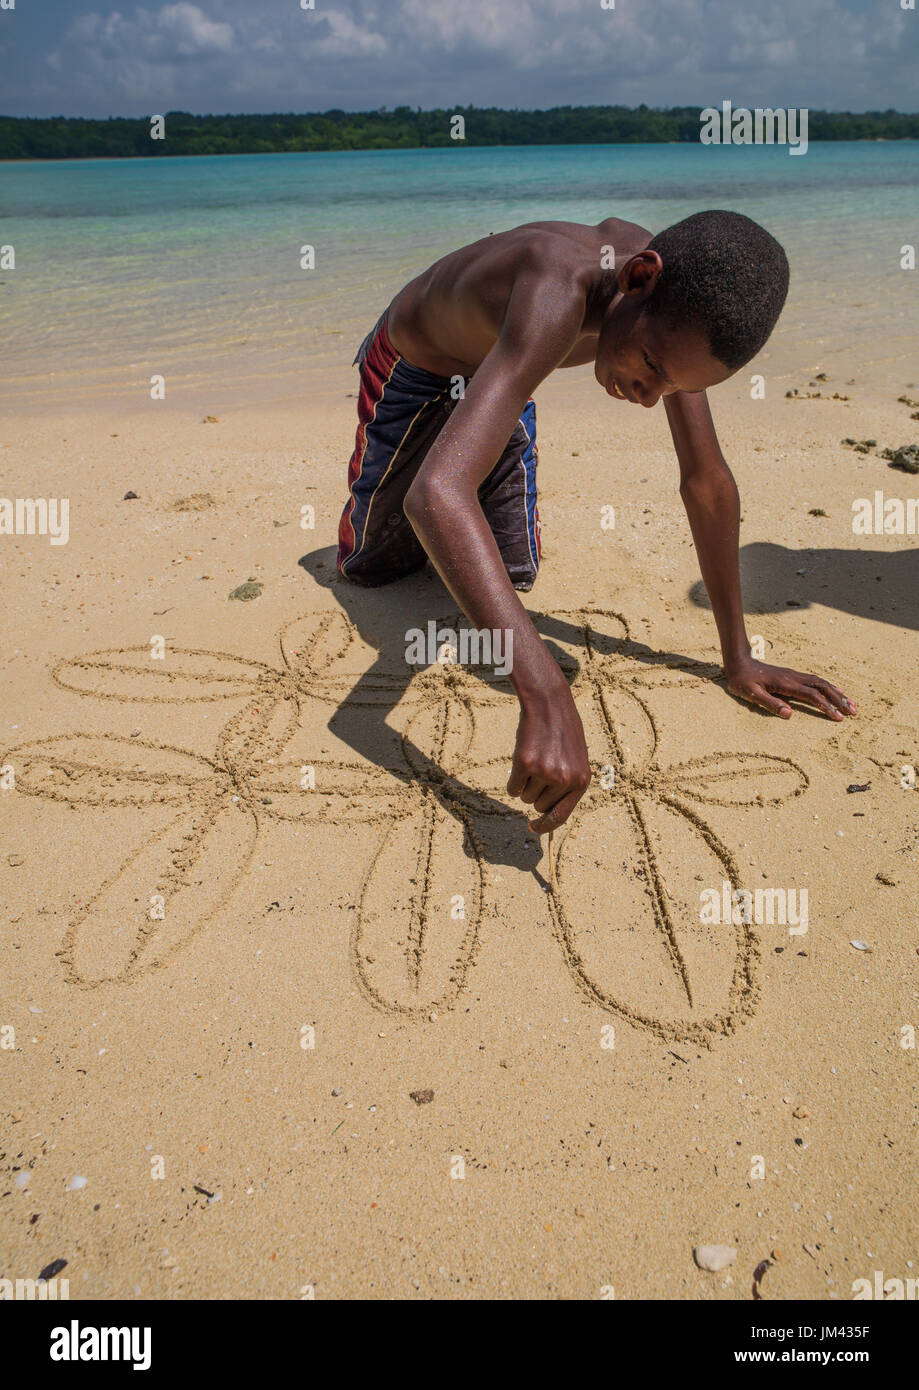 Boy on the beach making a traditional sand drawing, Sanma Province